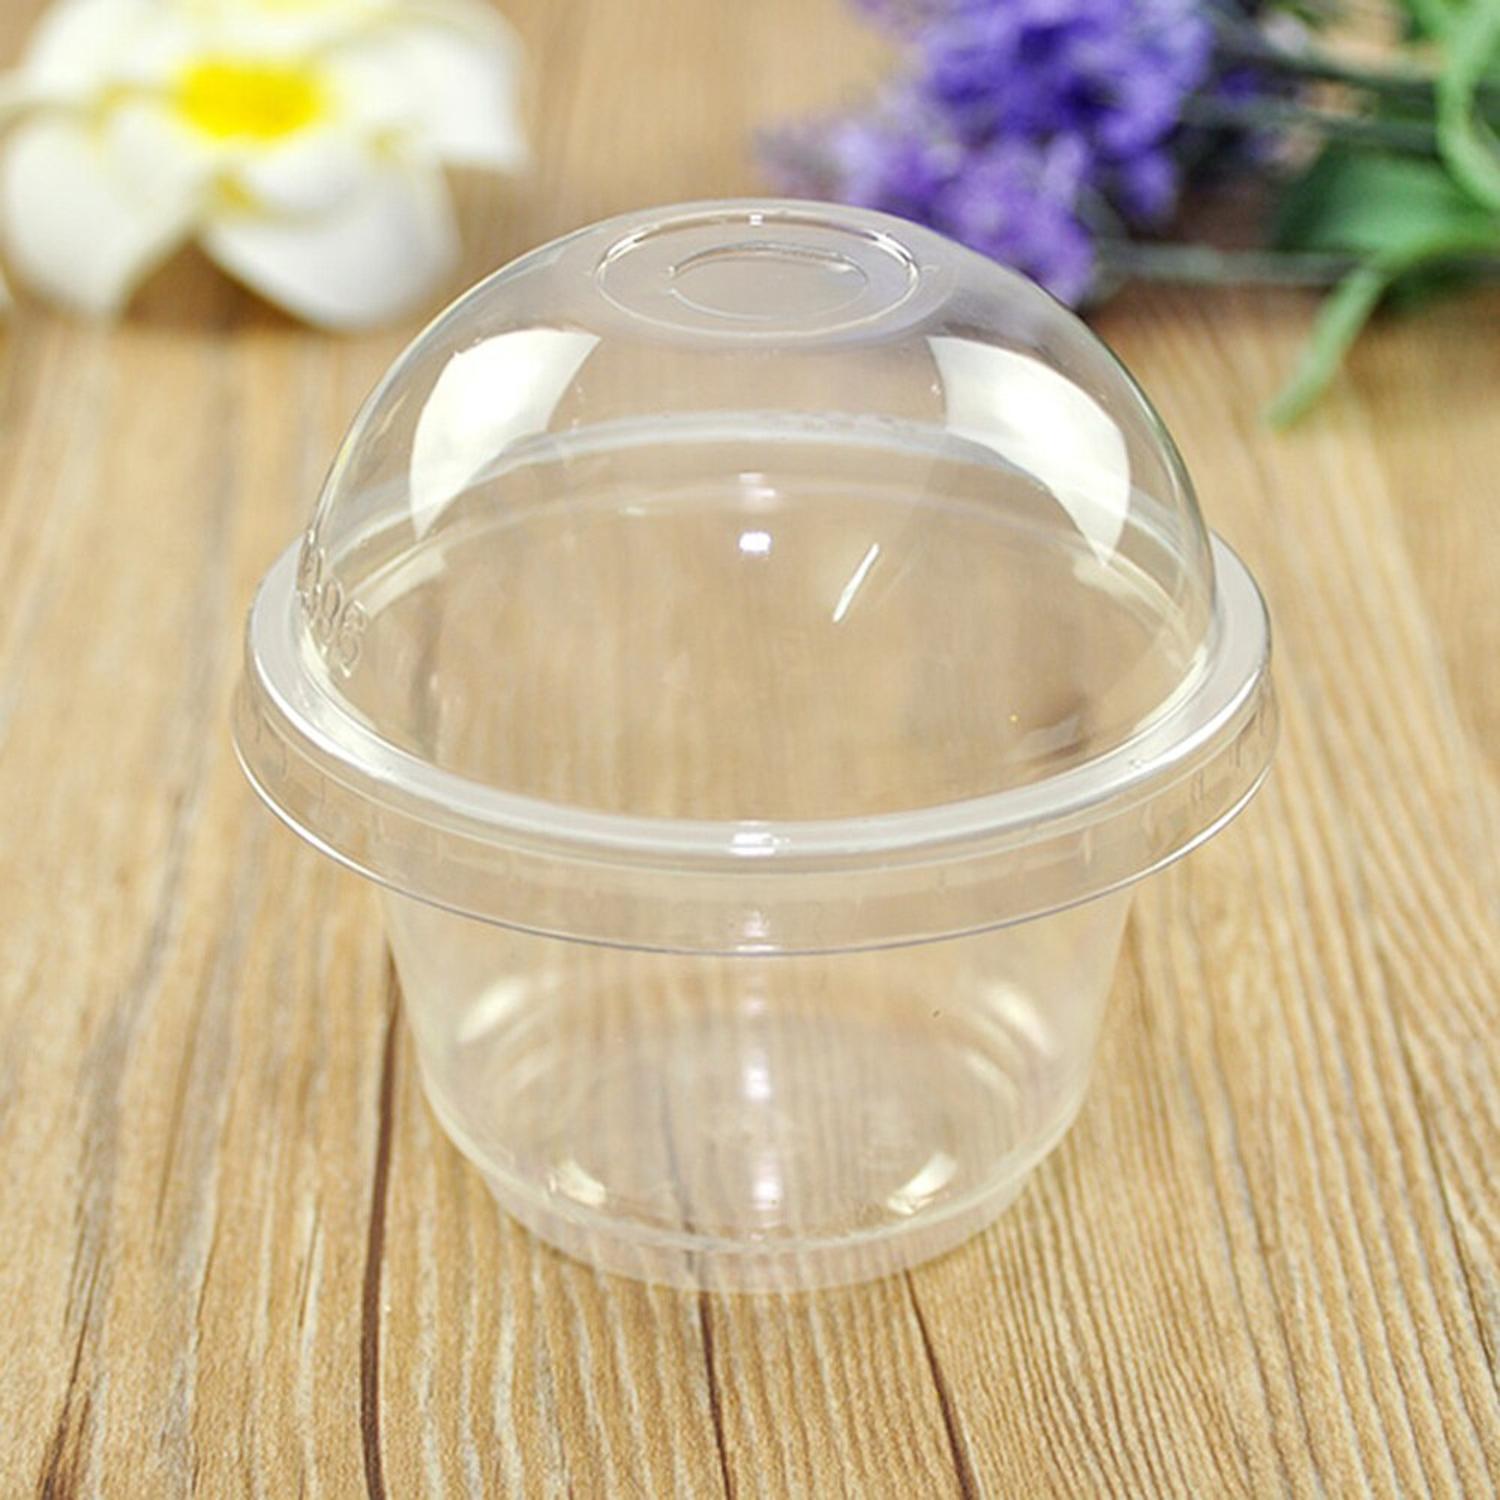 SINGLE CUP CLEAR PLASTIC CUPCAKE PLASTIC HOLDER